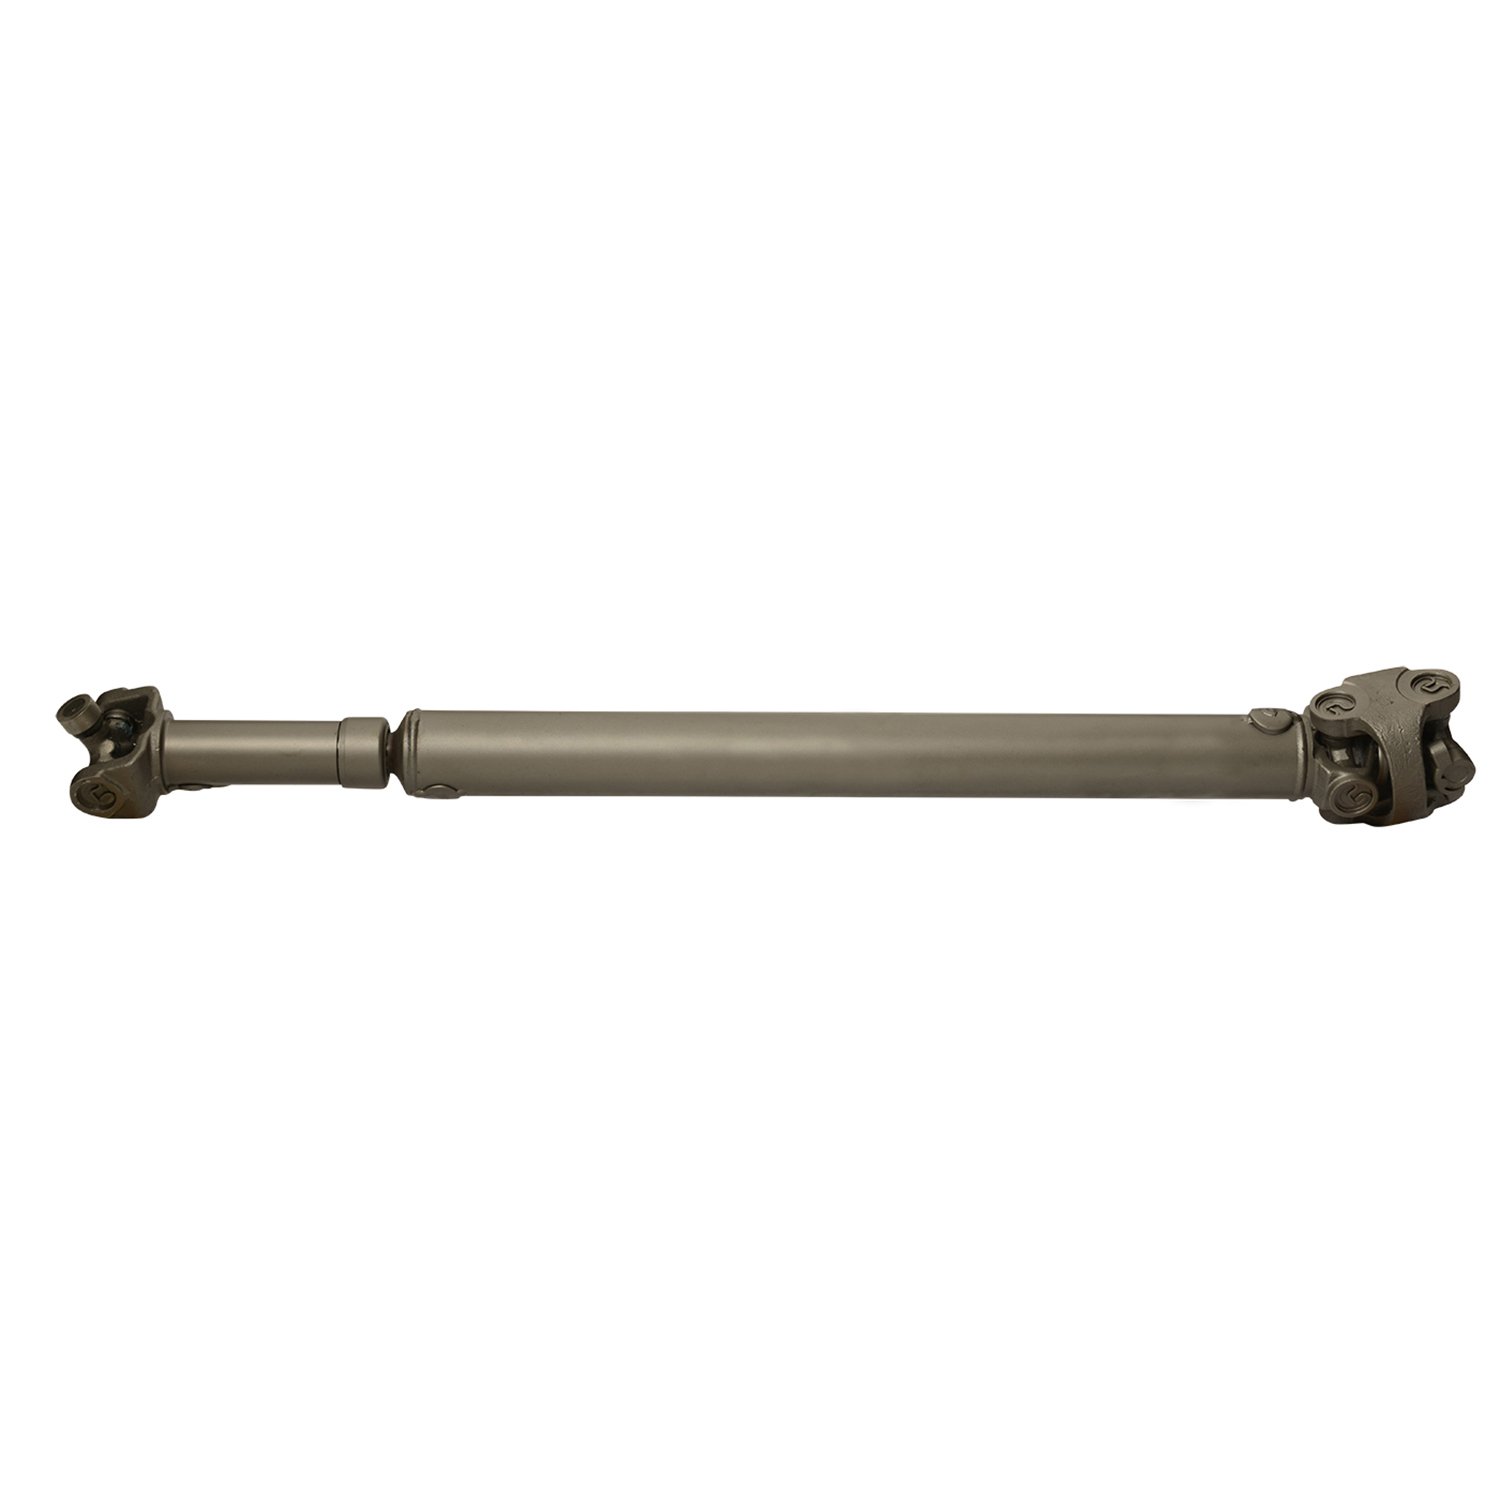 USA Standard ZDS9431 Rear Driveshaft, For Bronco, 29-5/8 in. Center-To-Center